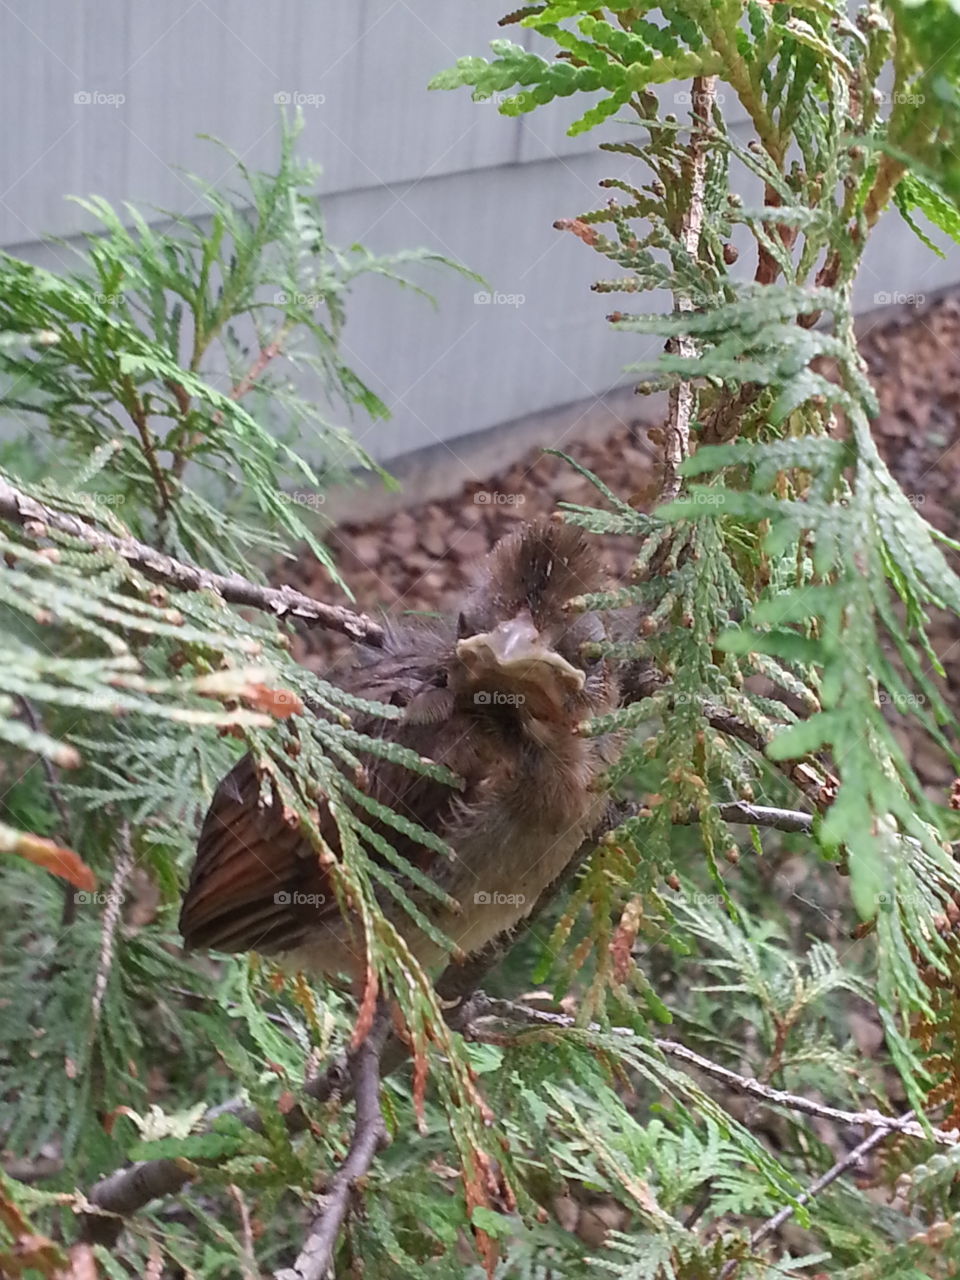 Baby Cardinal. Snapped this baby cardinal in my front yard -MN